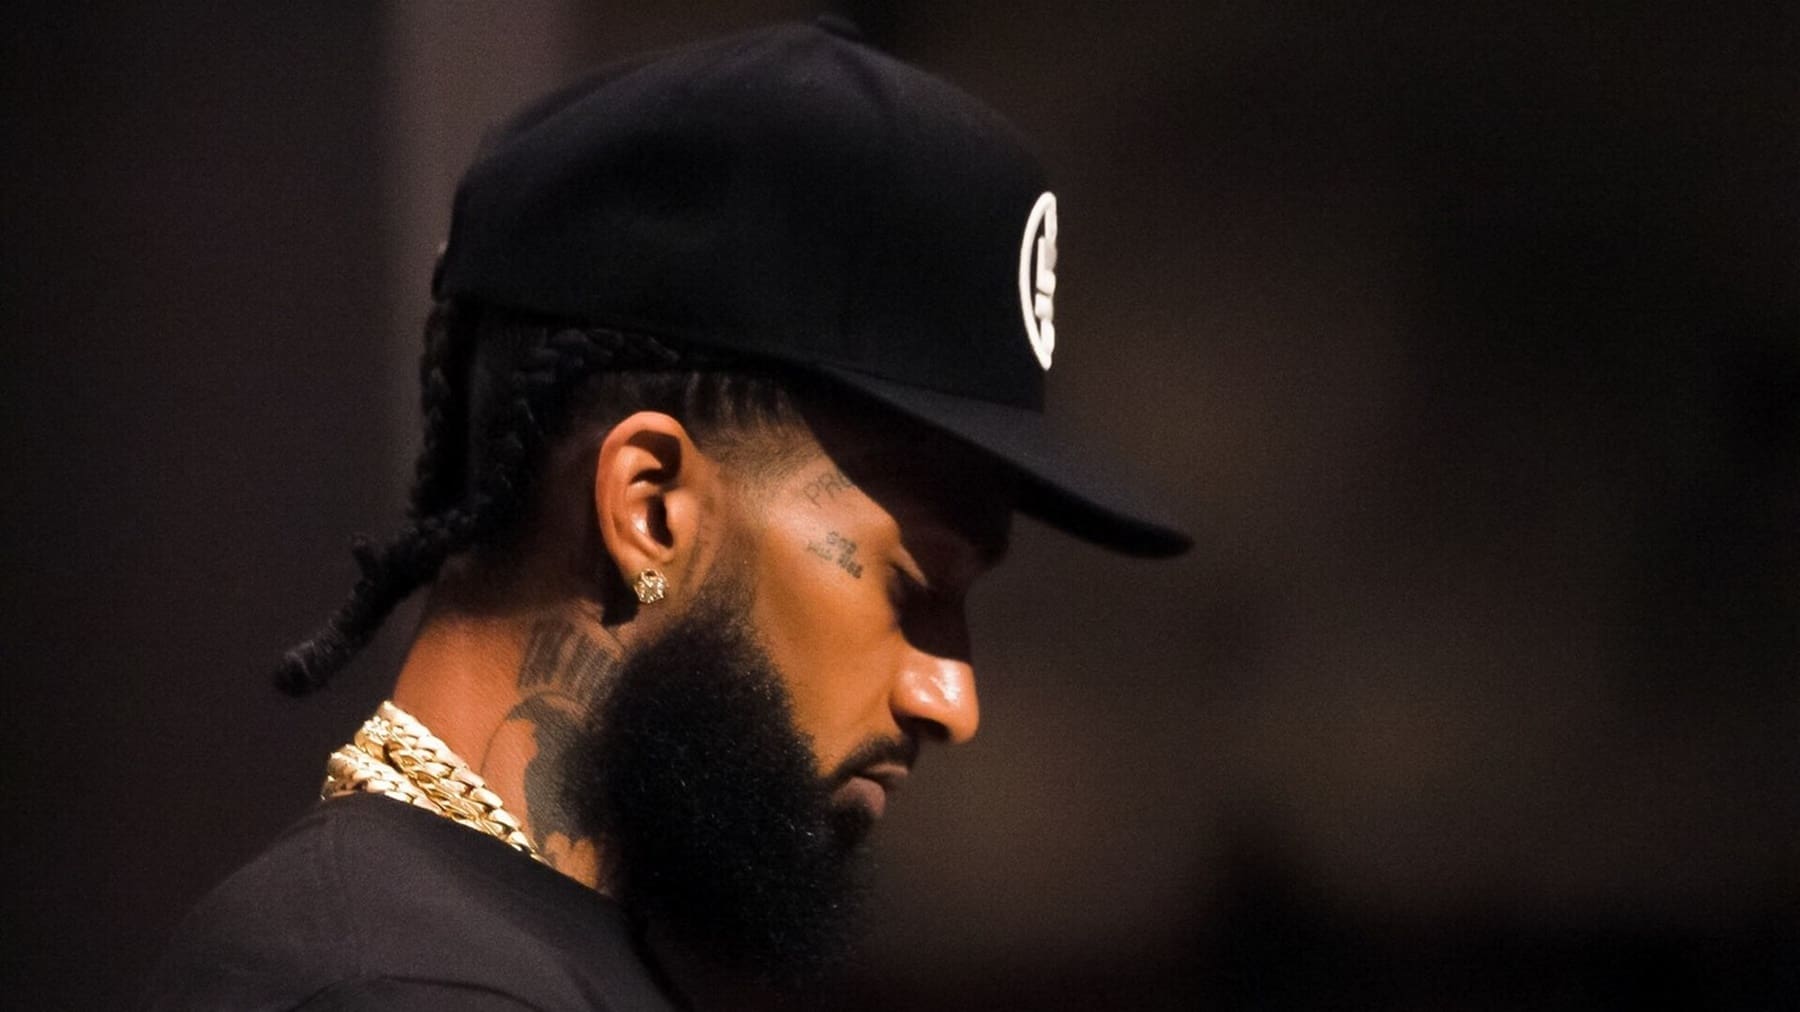 nipsey-hussle-s-brother-samiel-asghedom-also-known-as-blacc-sam-is